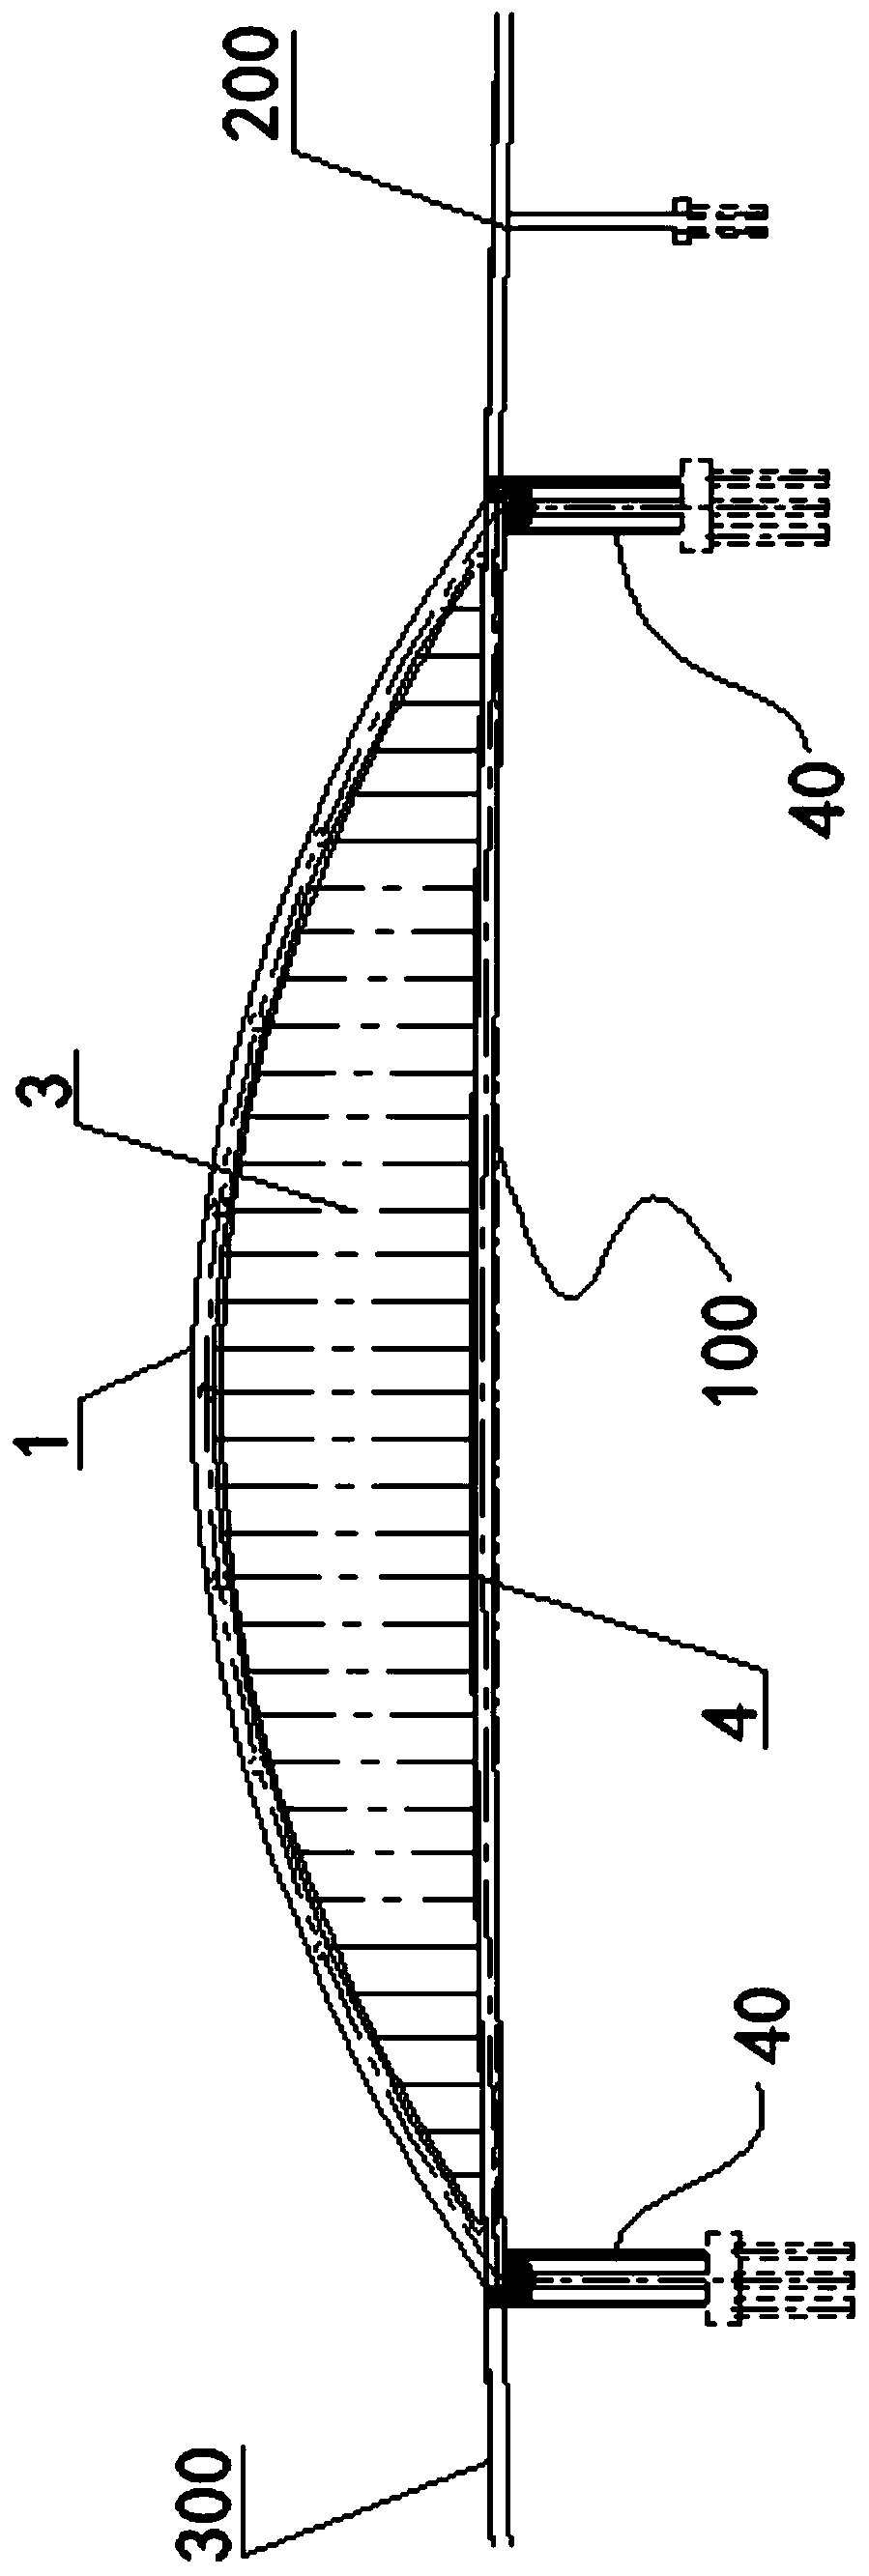 Temporary device for maintaining mechanical equilibrium under first-arch and second-girder bridge construction process